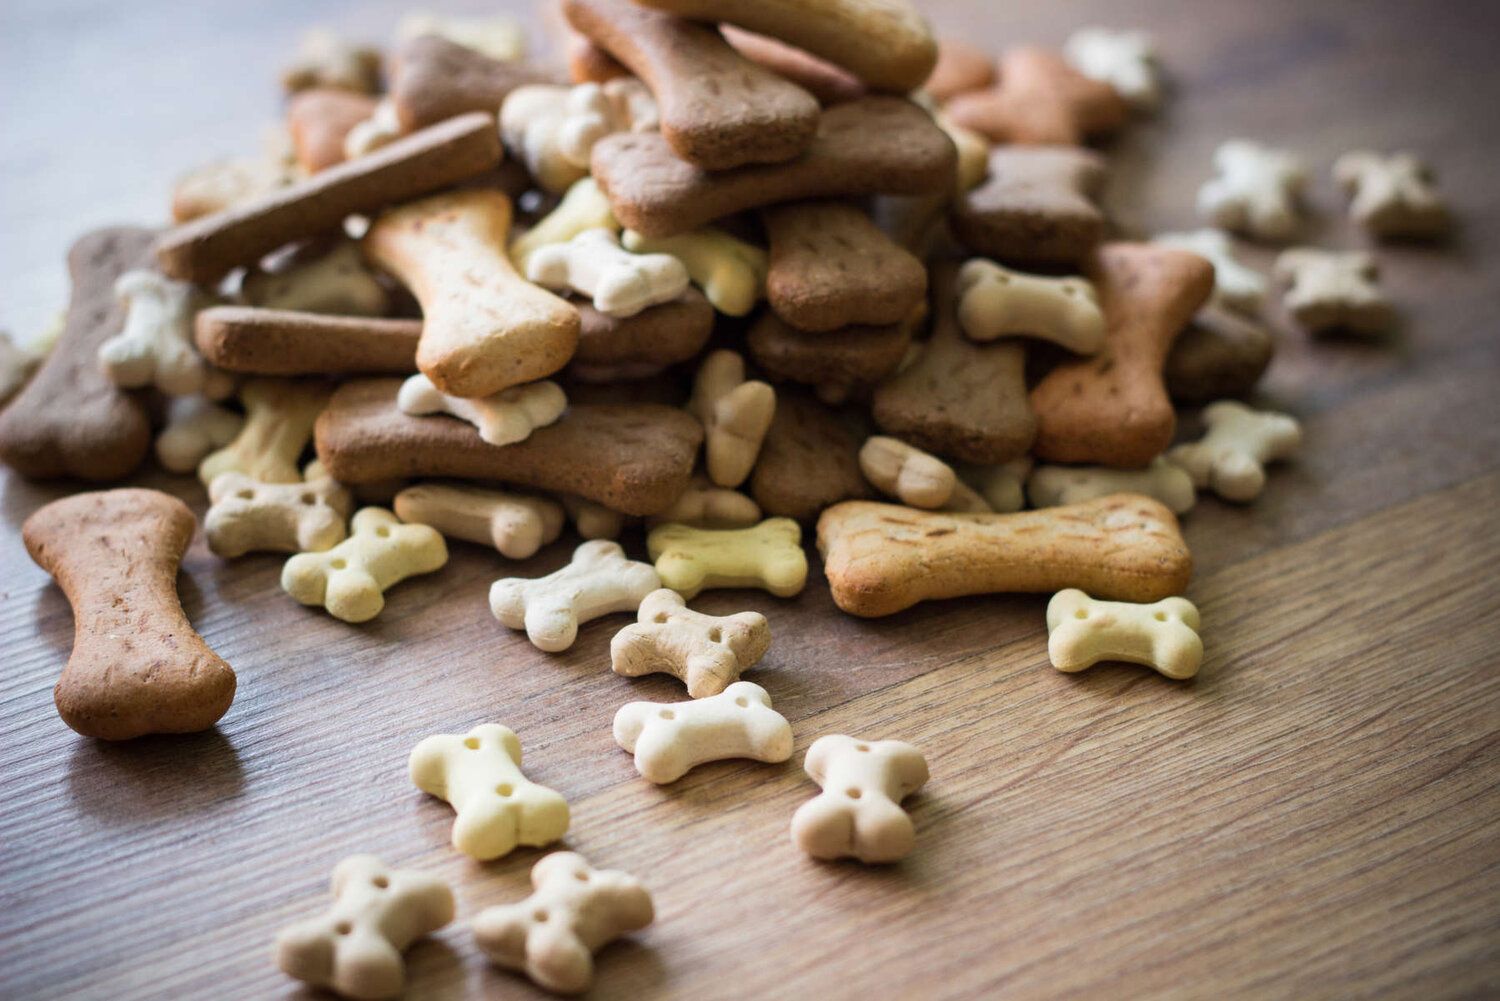 Choosing Food Snacks That Are Suitable for Pets